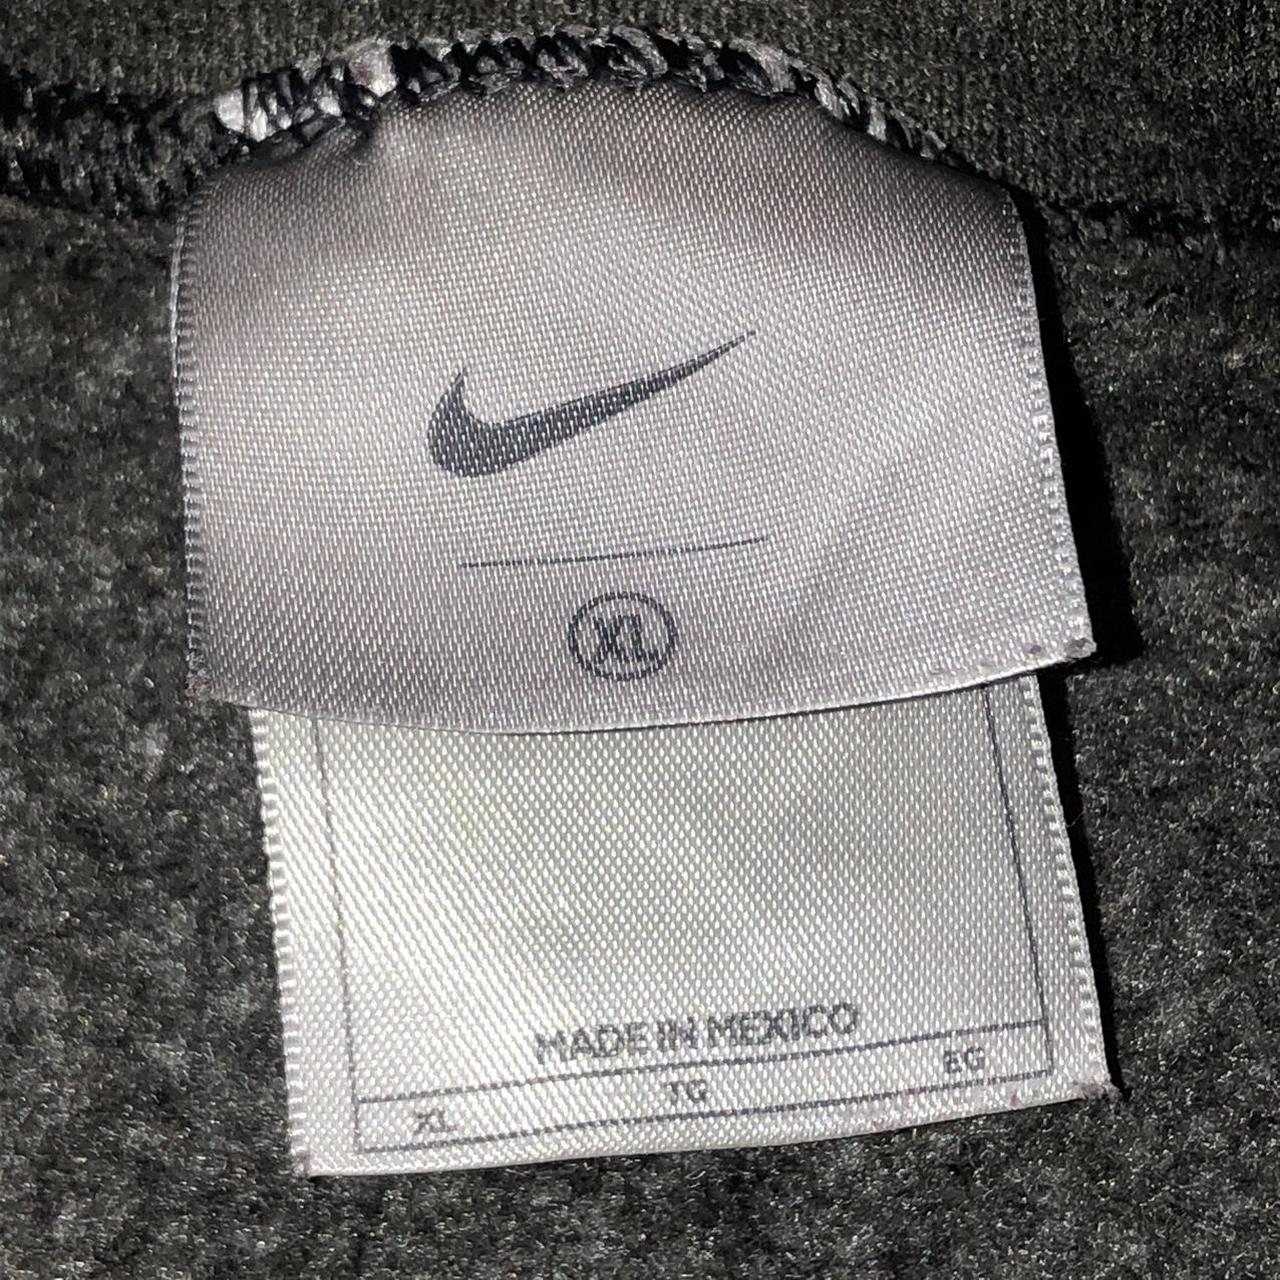 Product Image 3 - Nike Embroidered Logo Crewneck
Dated: 2000s

-embroidered